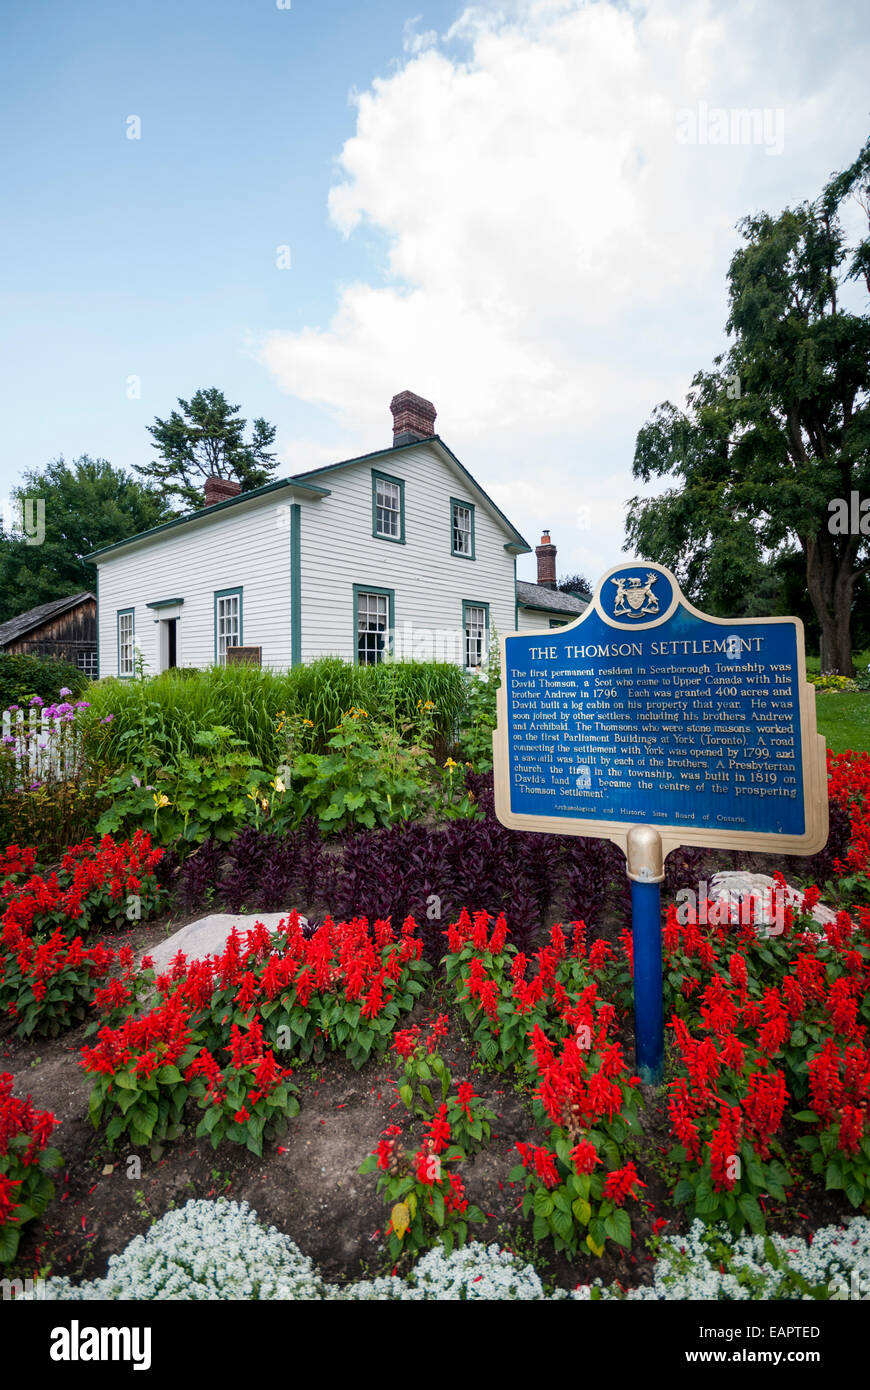 The historic home of the Thomson family one of the earliest settlers in the city of Toronto Ontario Canada Stock Photo